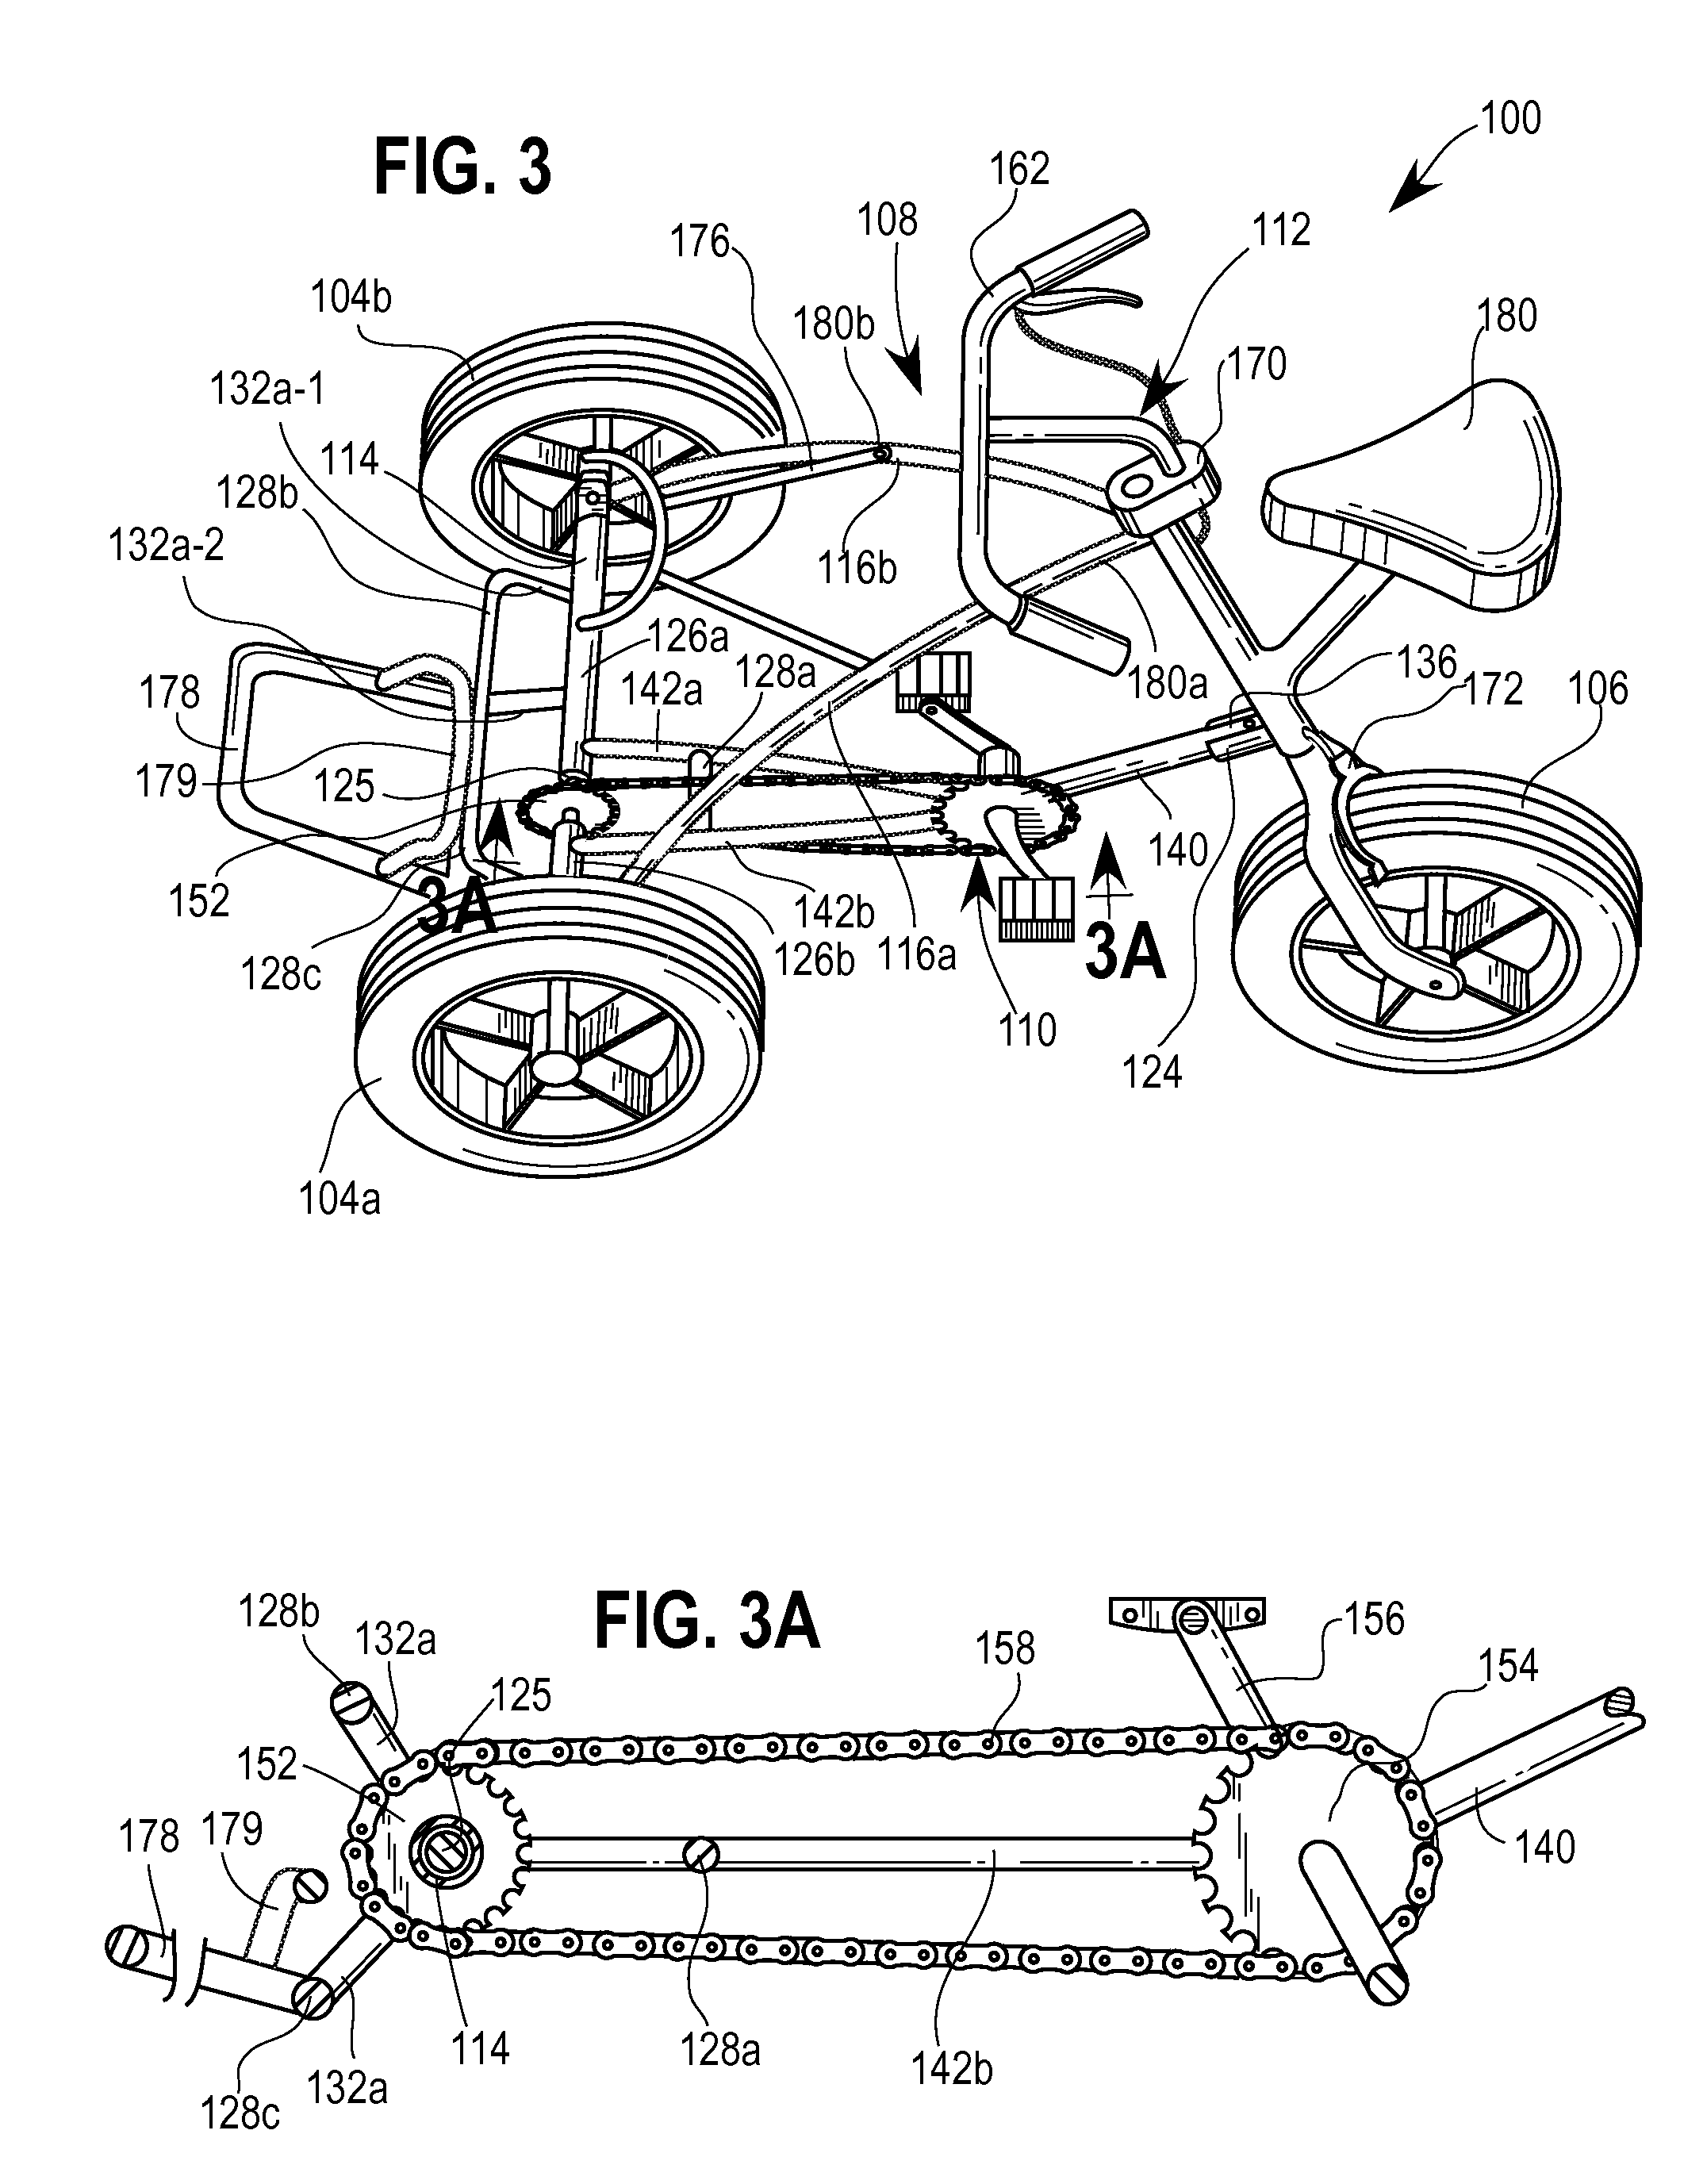 Foldable vehicle for carrying a golf bag